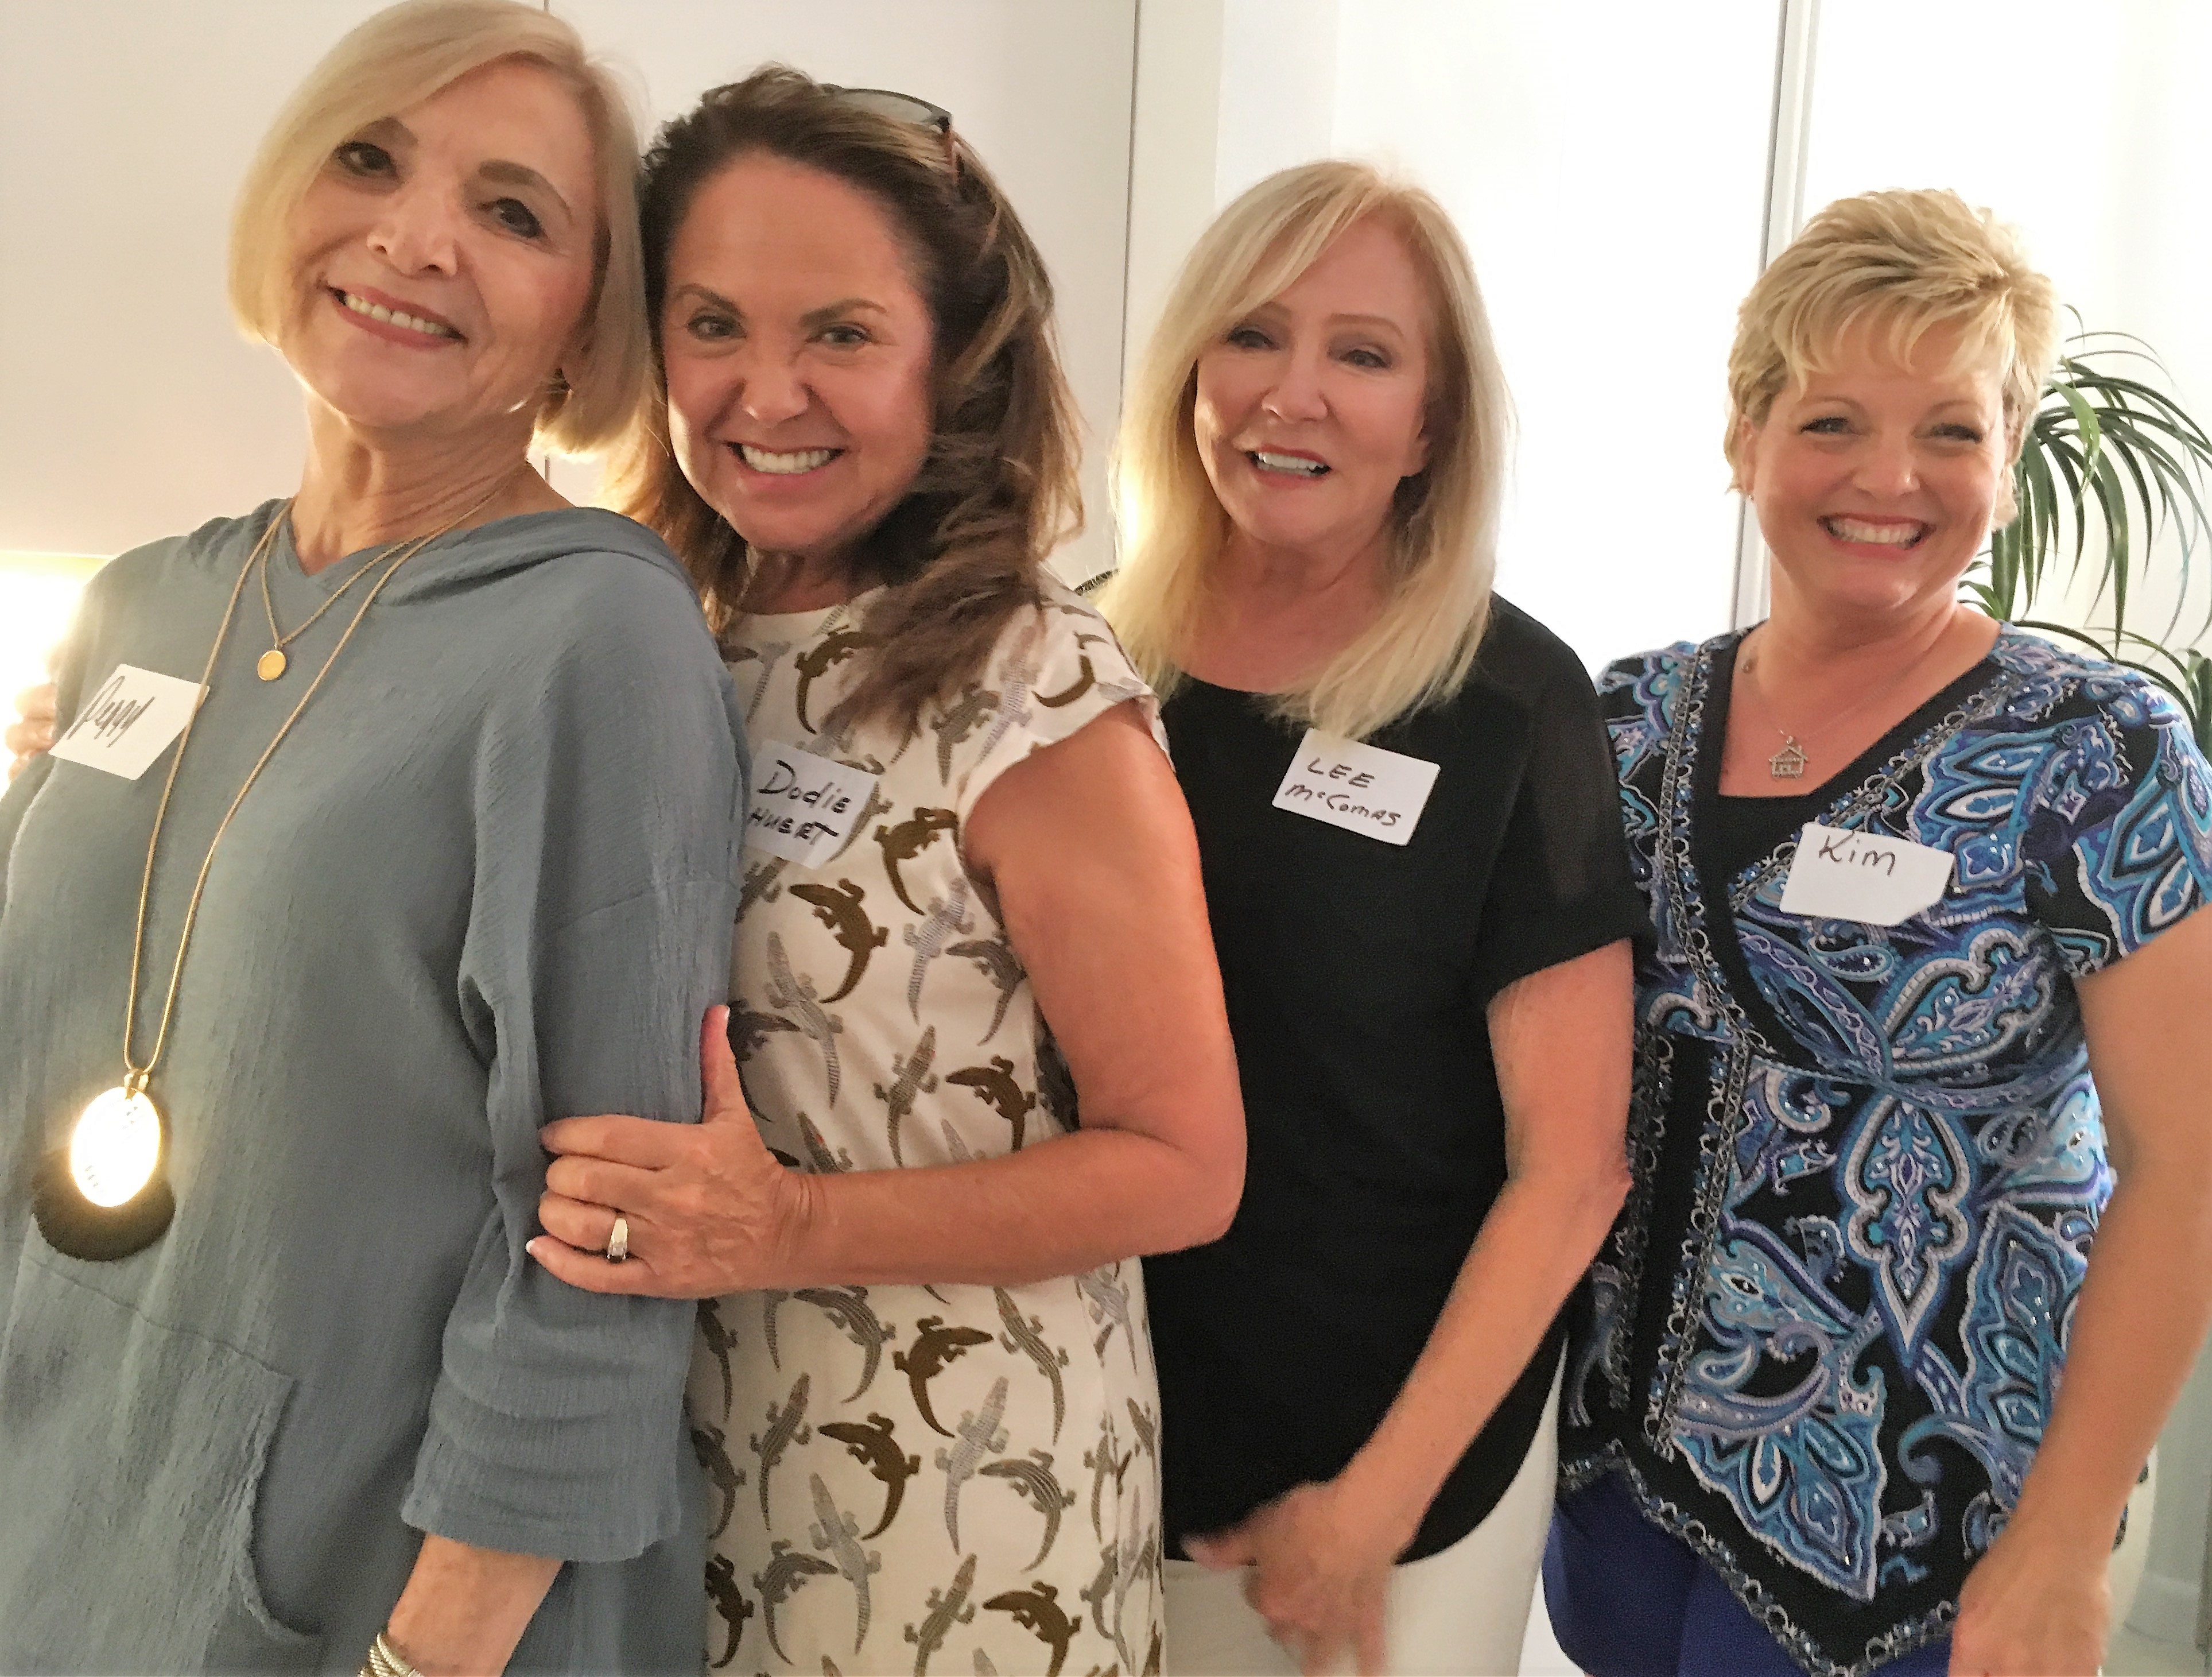 Peggy Fainelli, Dodie Shuert, Lee McComas and Kim Lege also enjoyed the September Mix and Mingle.